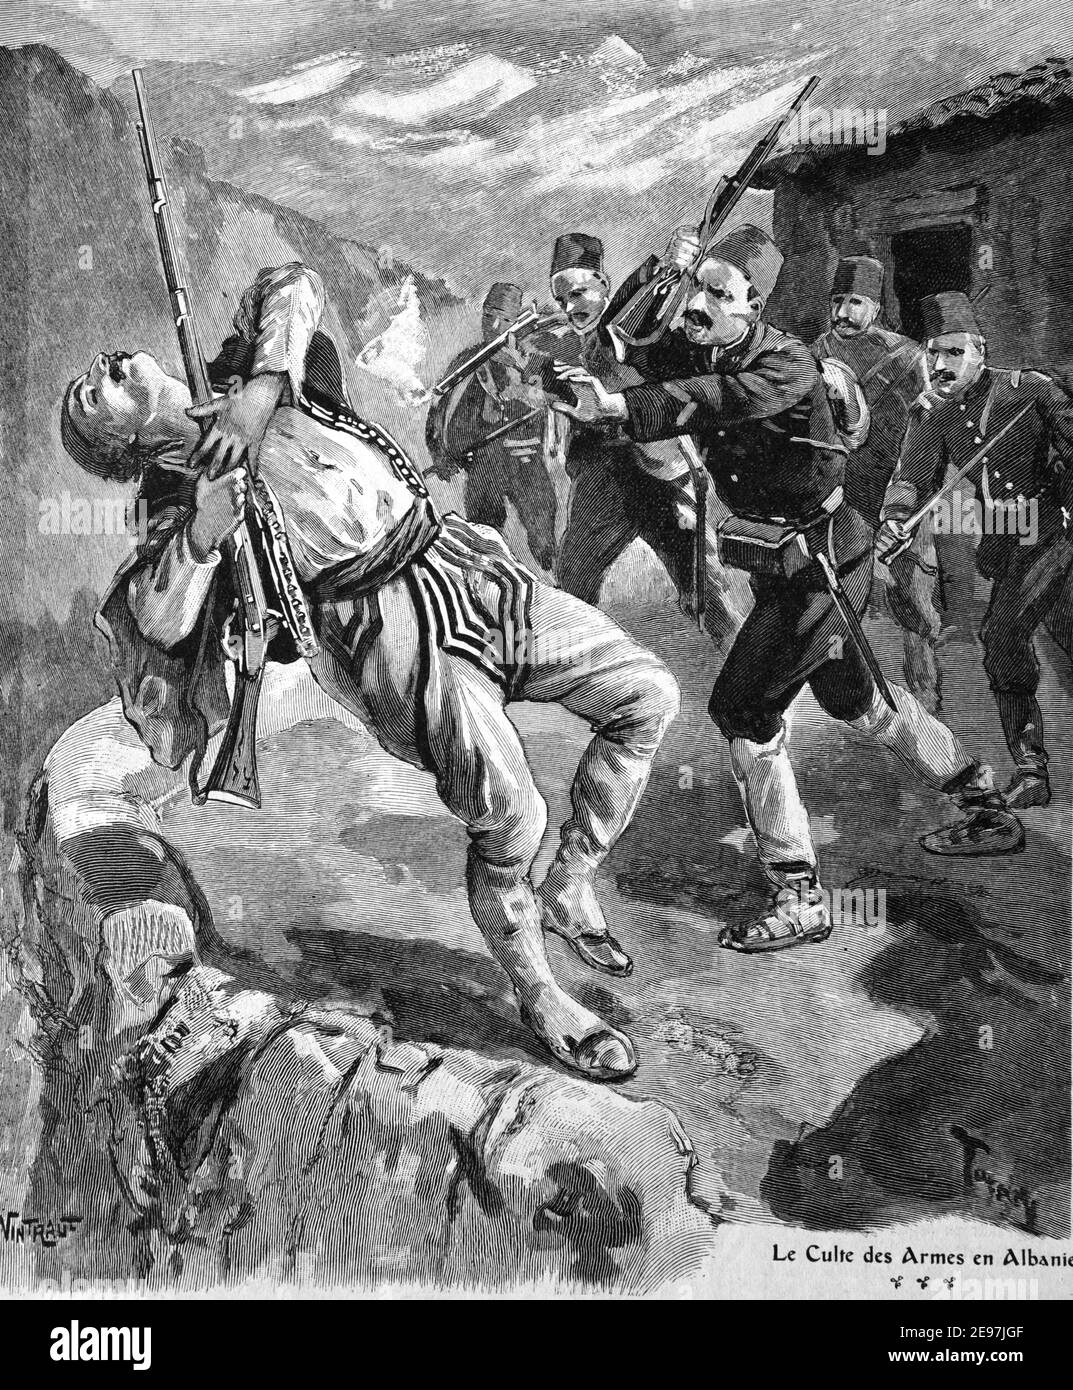 War in the Balkans Ottoman Turkish Soldiers or Forces Confronting Rebel during Uprising Against Turkish Rule before First Balkan War (1912-1913) 1911 Vintage Illustration or Engraving Stock Photo